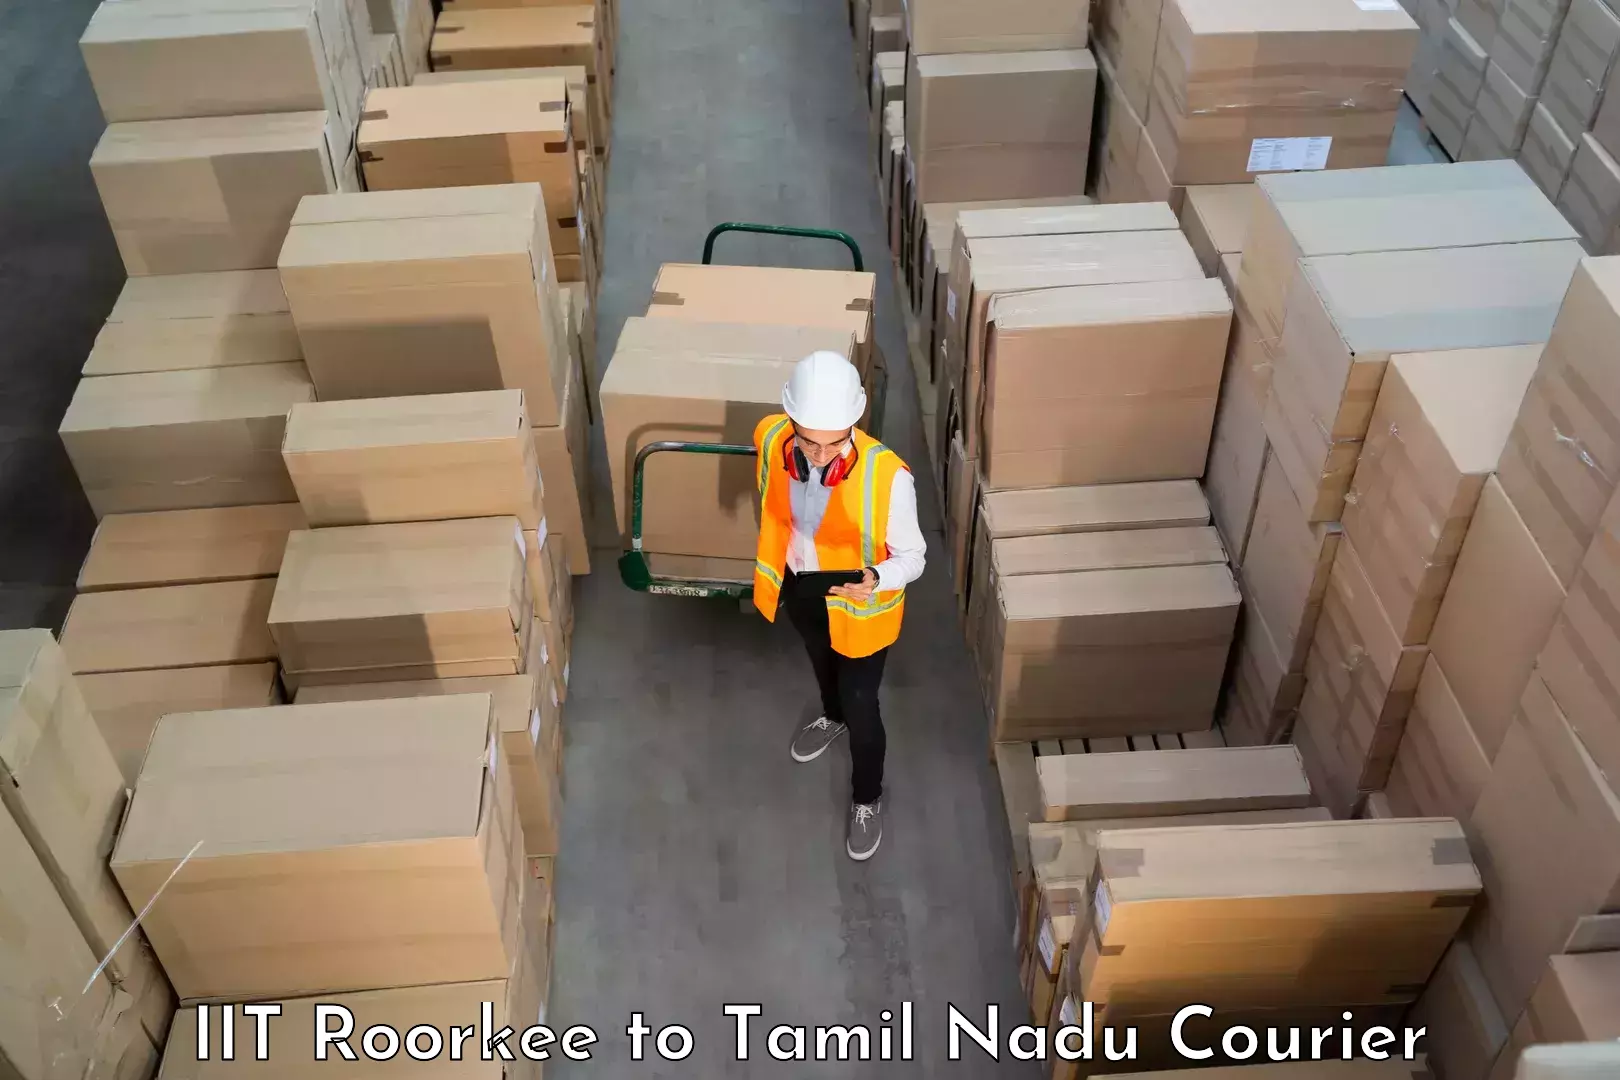 Furniture delivery service IIT Roorkee to Tuticorin Port